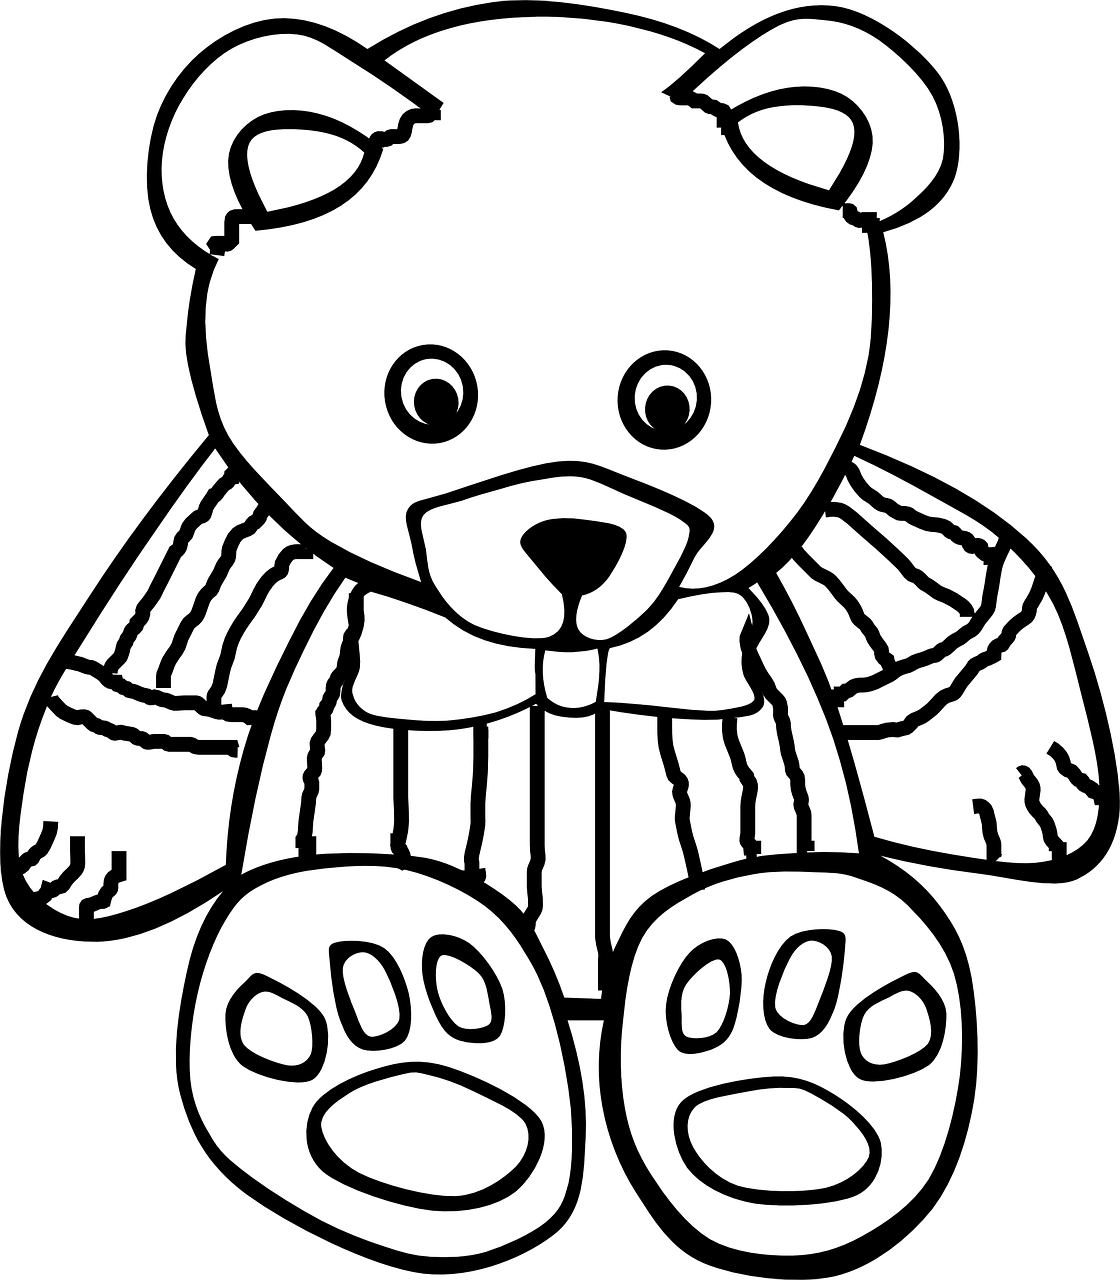 a black and white drawing of a teddy bear, a cartoon, pixabay, sleepwear, [ colourful, black and white”, high-contrast